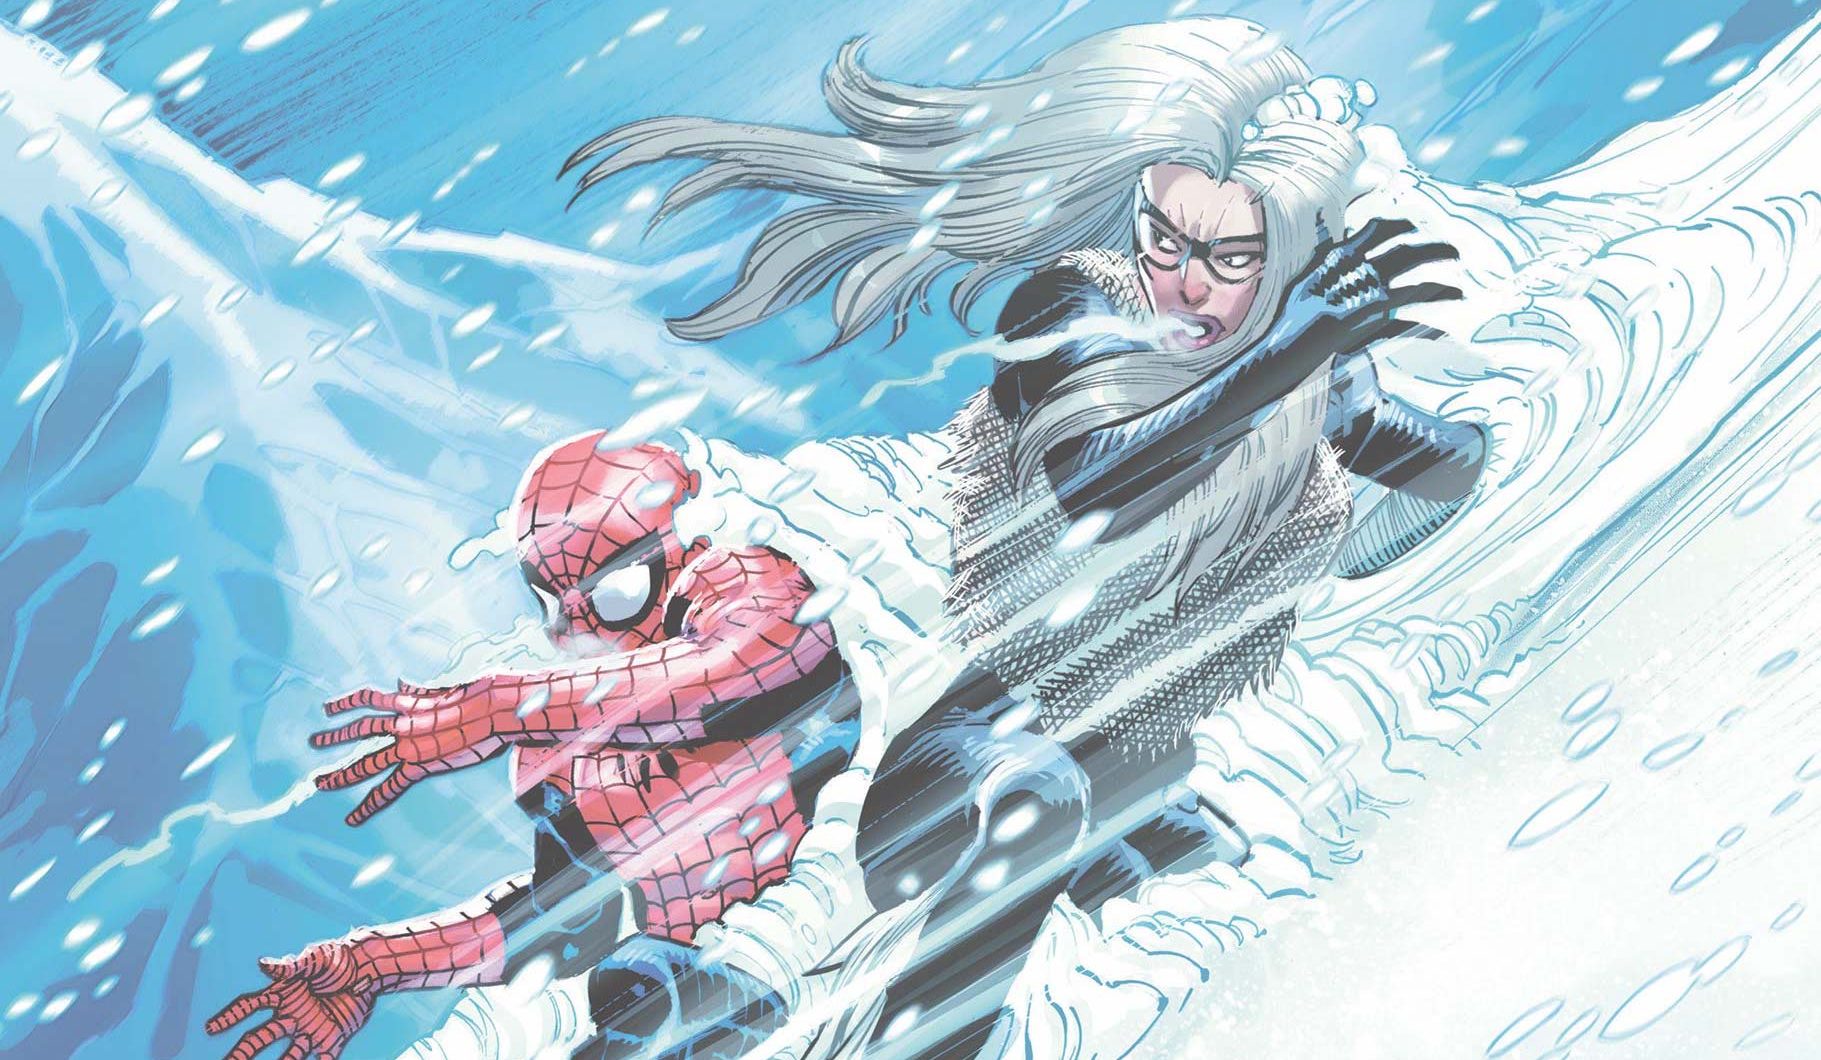 'Amazing Spider-Man' #20 will certainly get folks talking